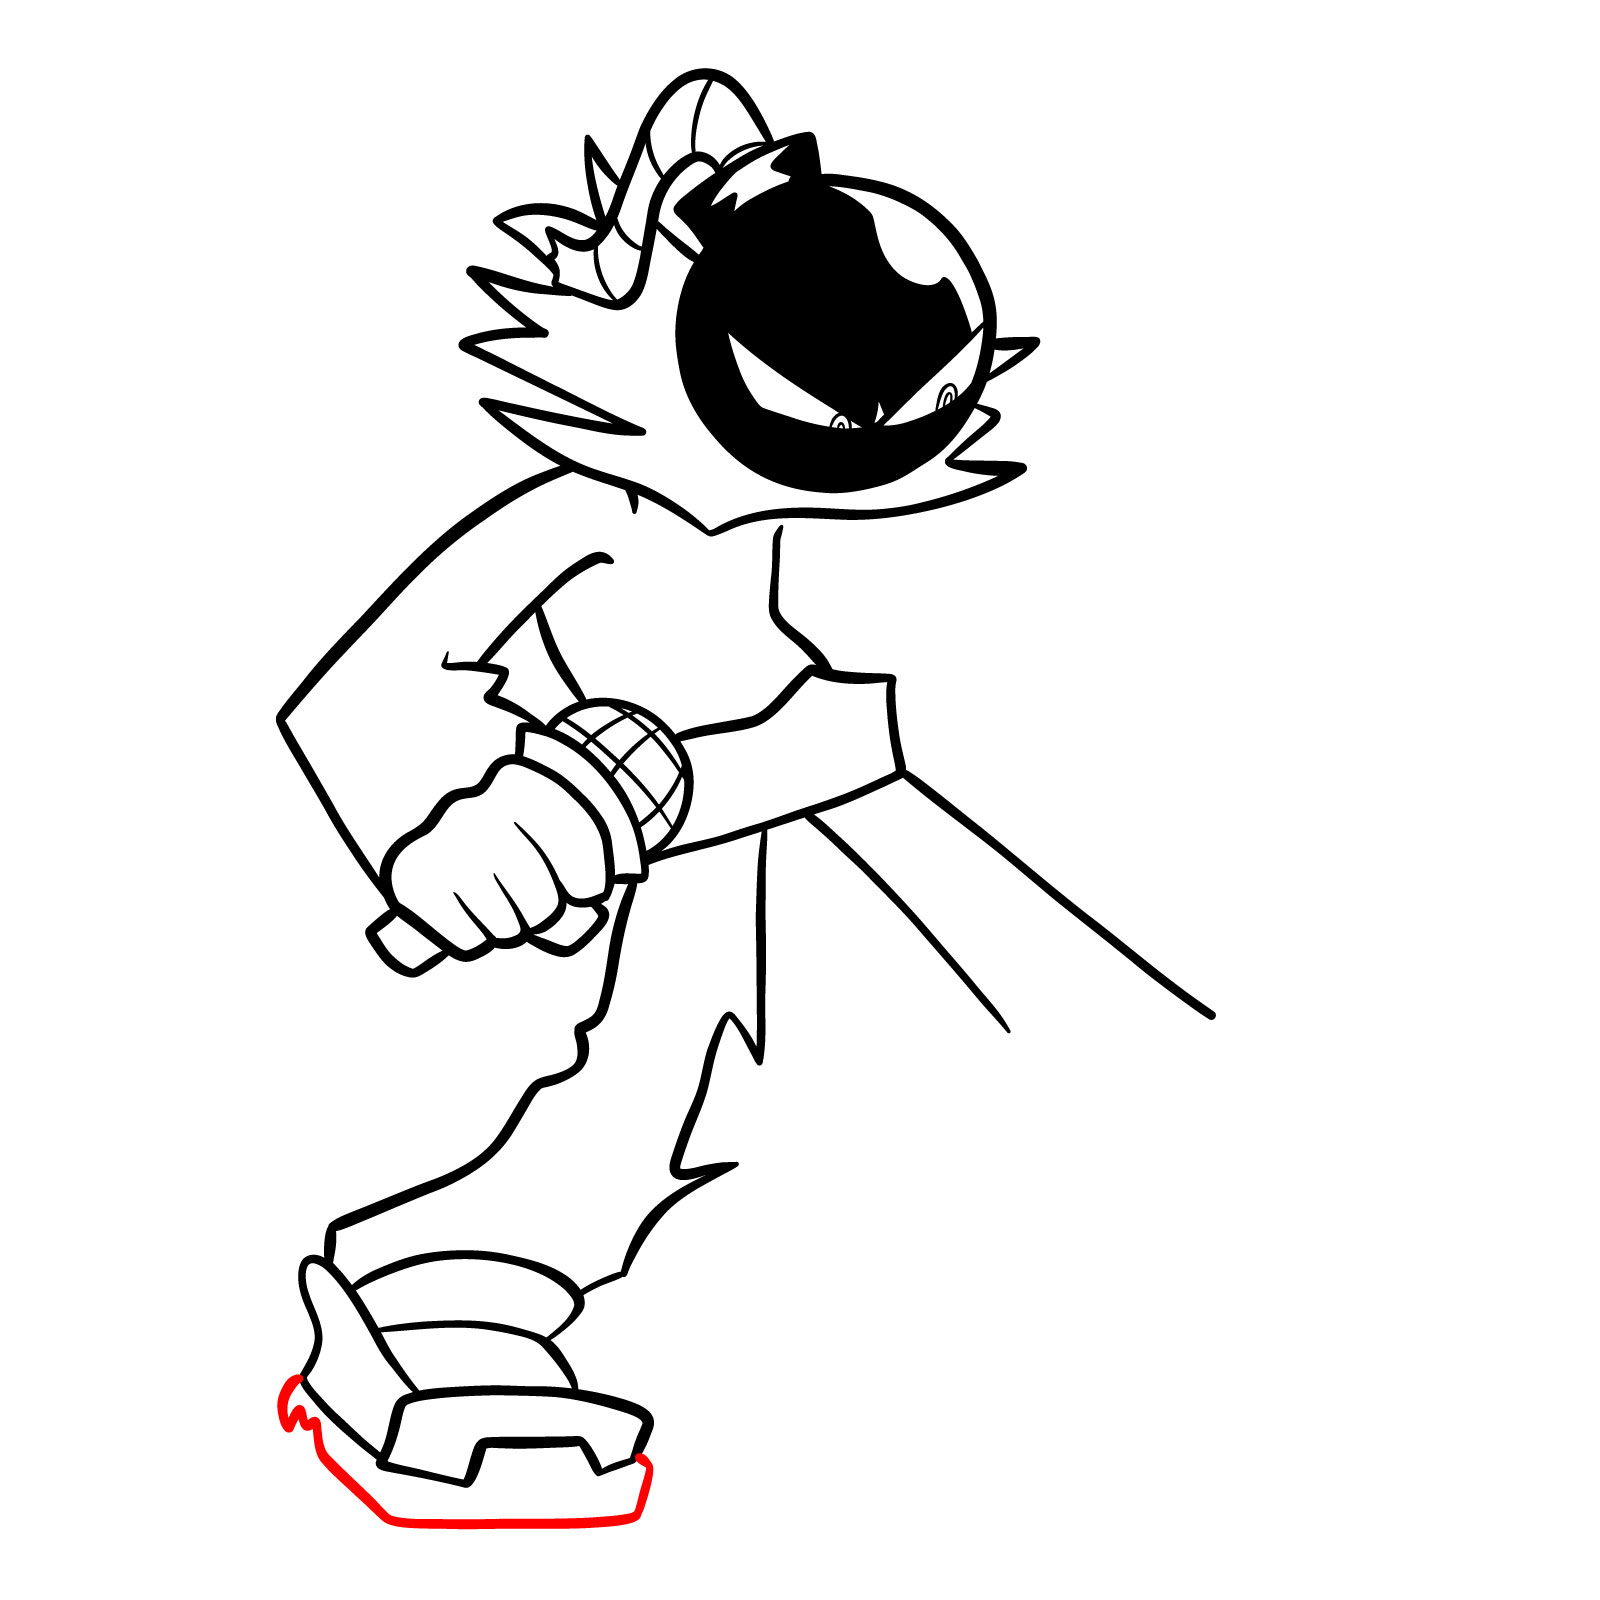 How to draw Aside Whitty from FNF Funkin' Aside mod - step 23